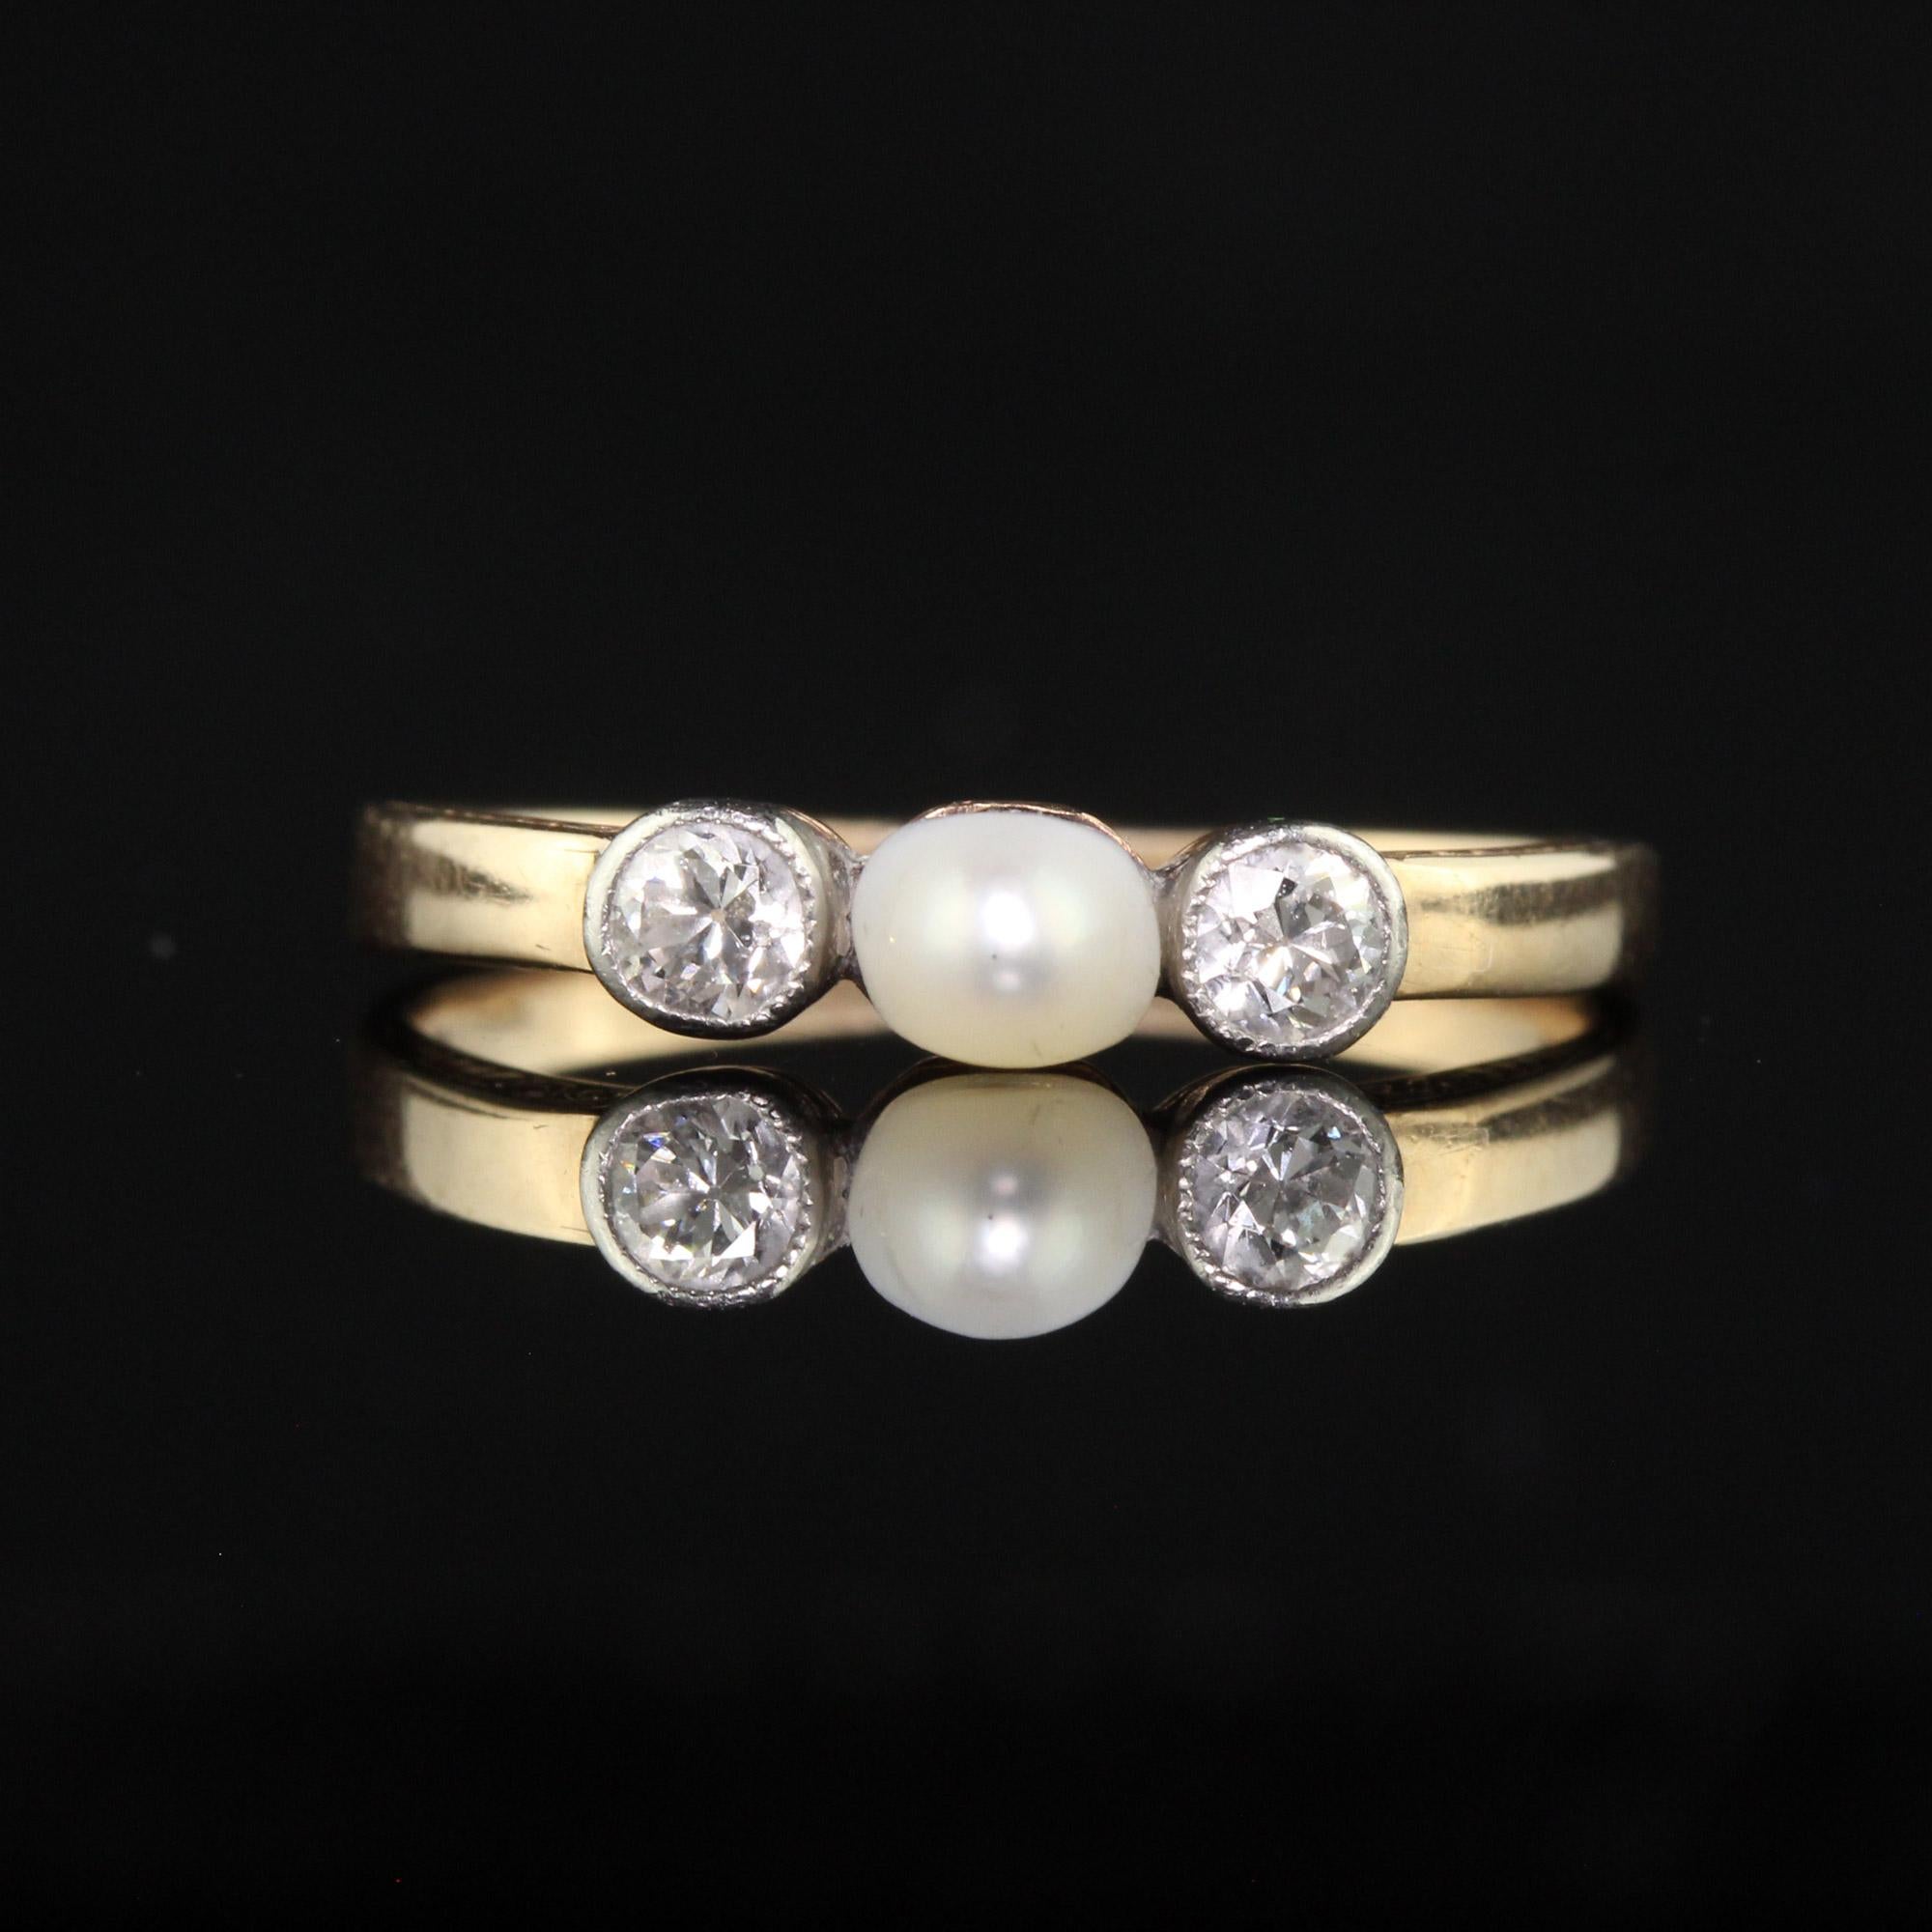 Antique Art Deco 14K Yellow Gold Old Euro Diamond and Pearl Three Stone Ring In Good Condition For Sale In Great Neck, NY